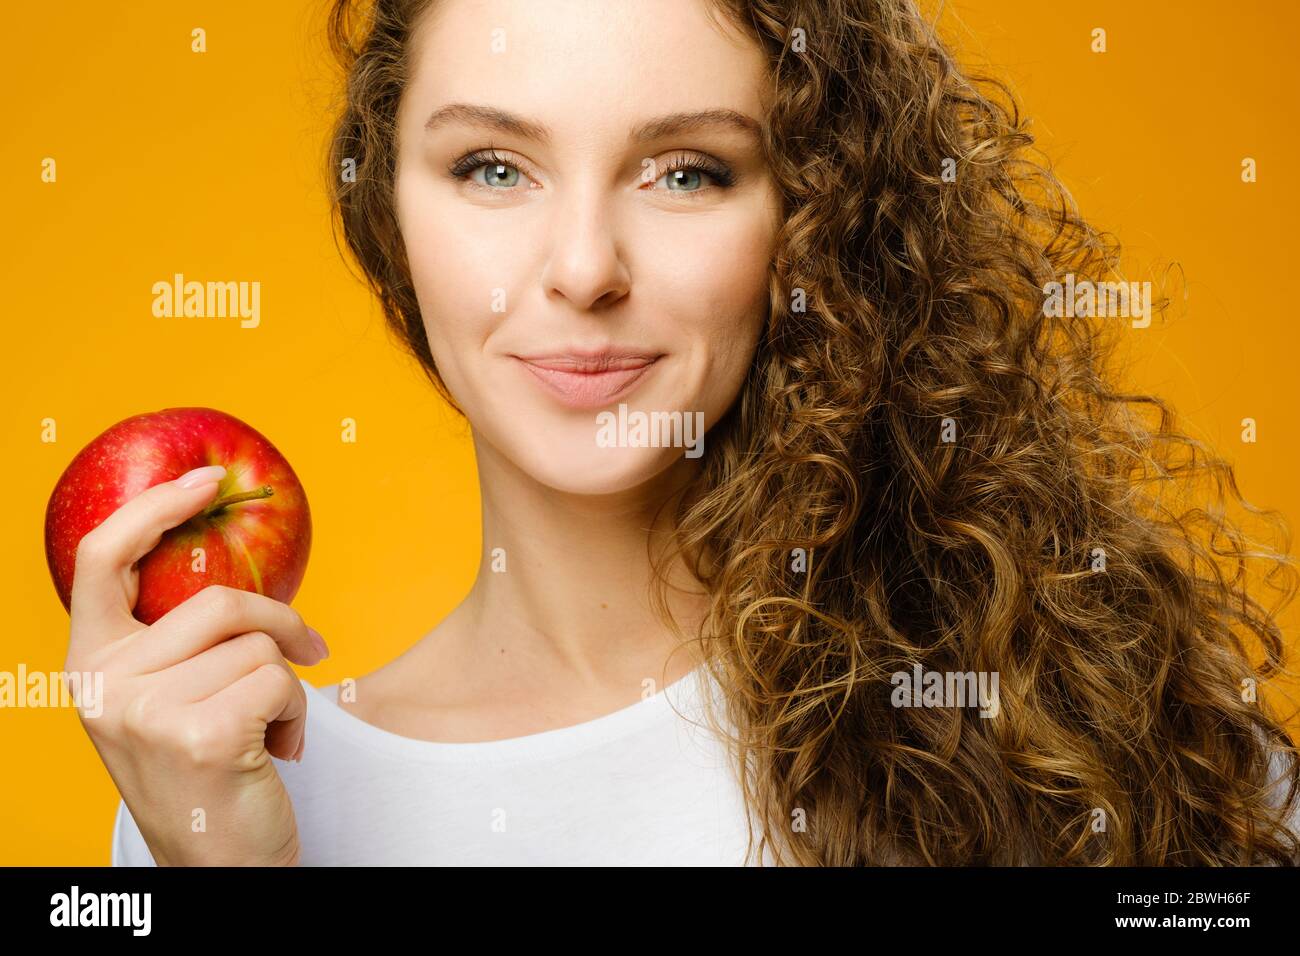 Closeup portrait of pretty caucasian girl with curly hair and red apple isolated on colorful yellow background Stock Photo